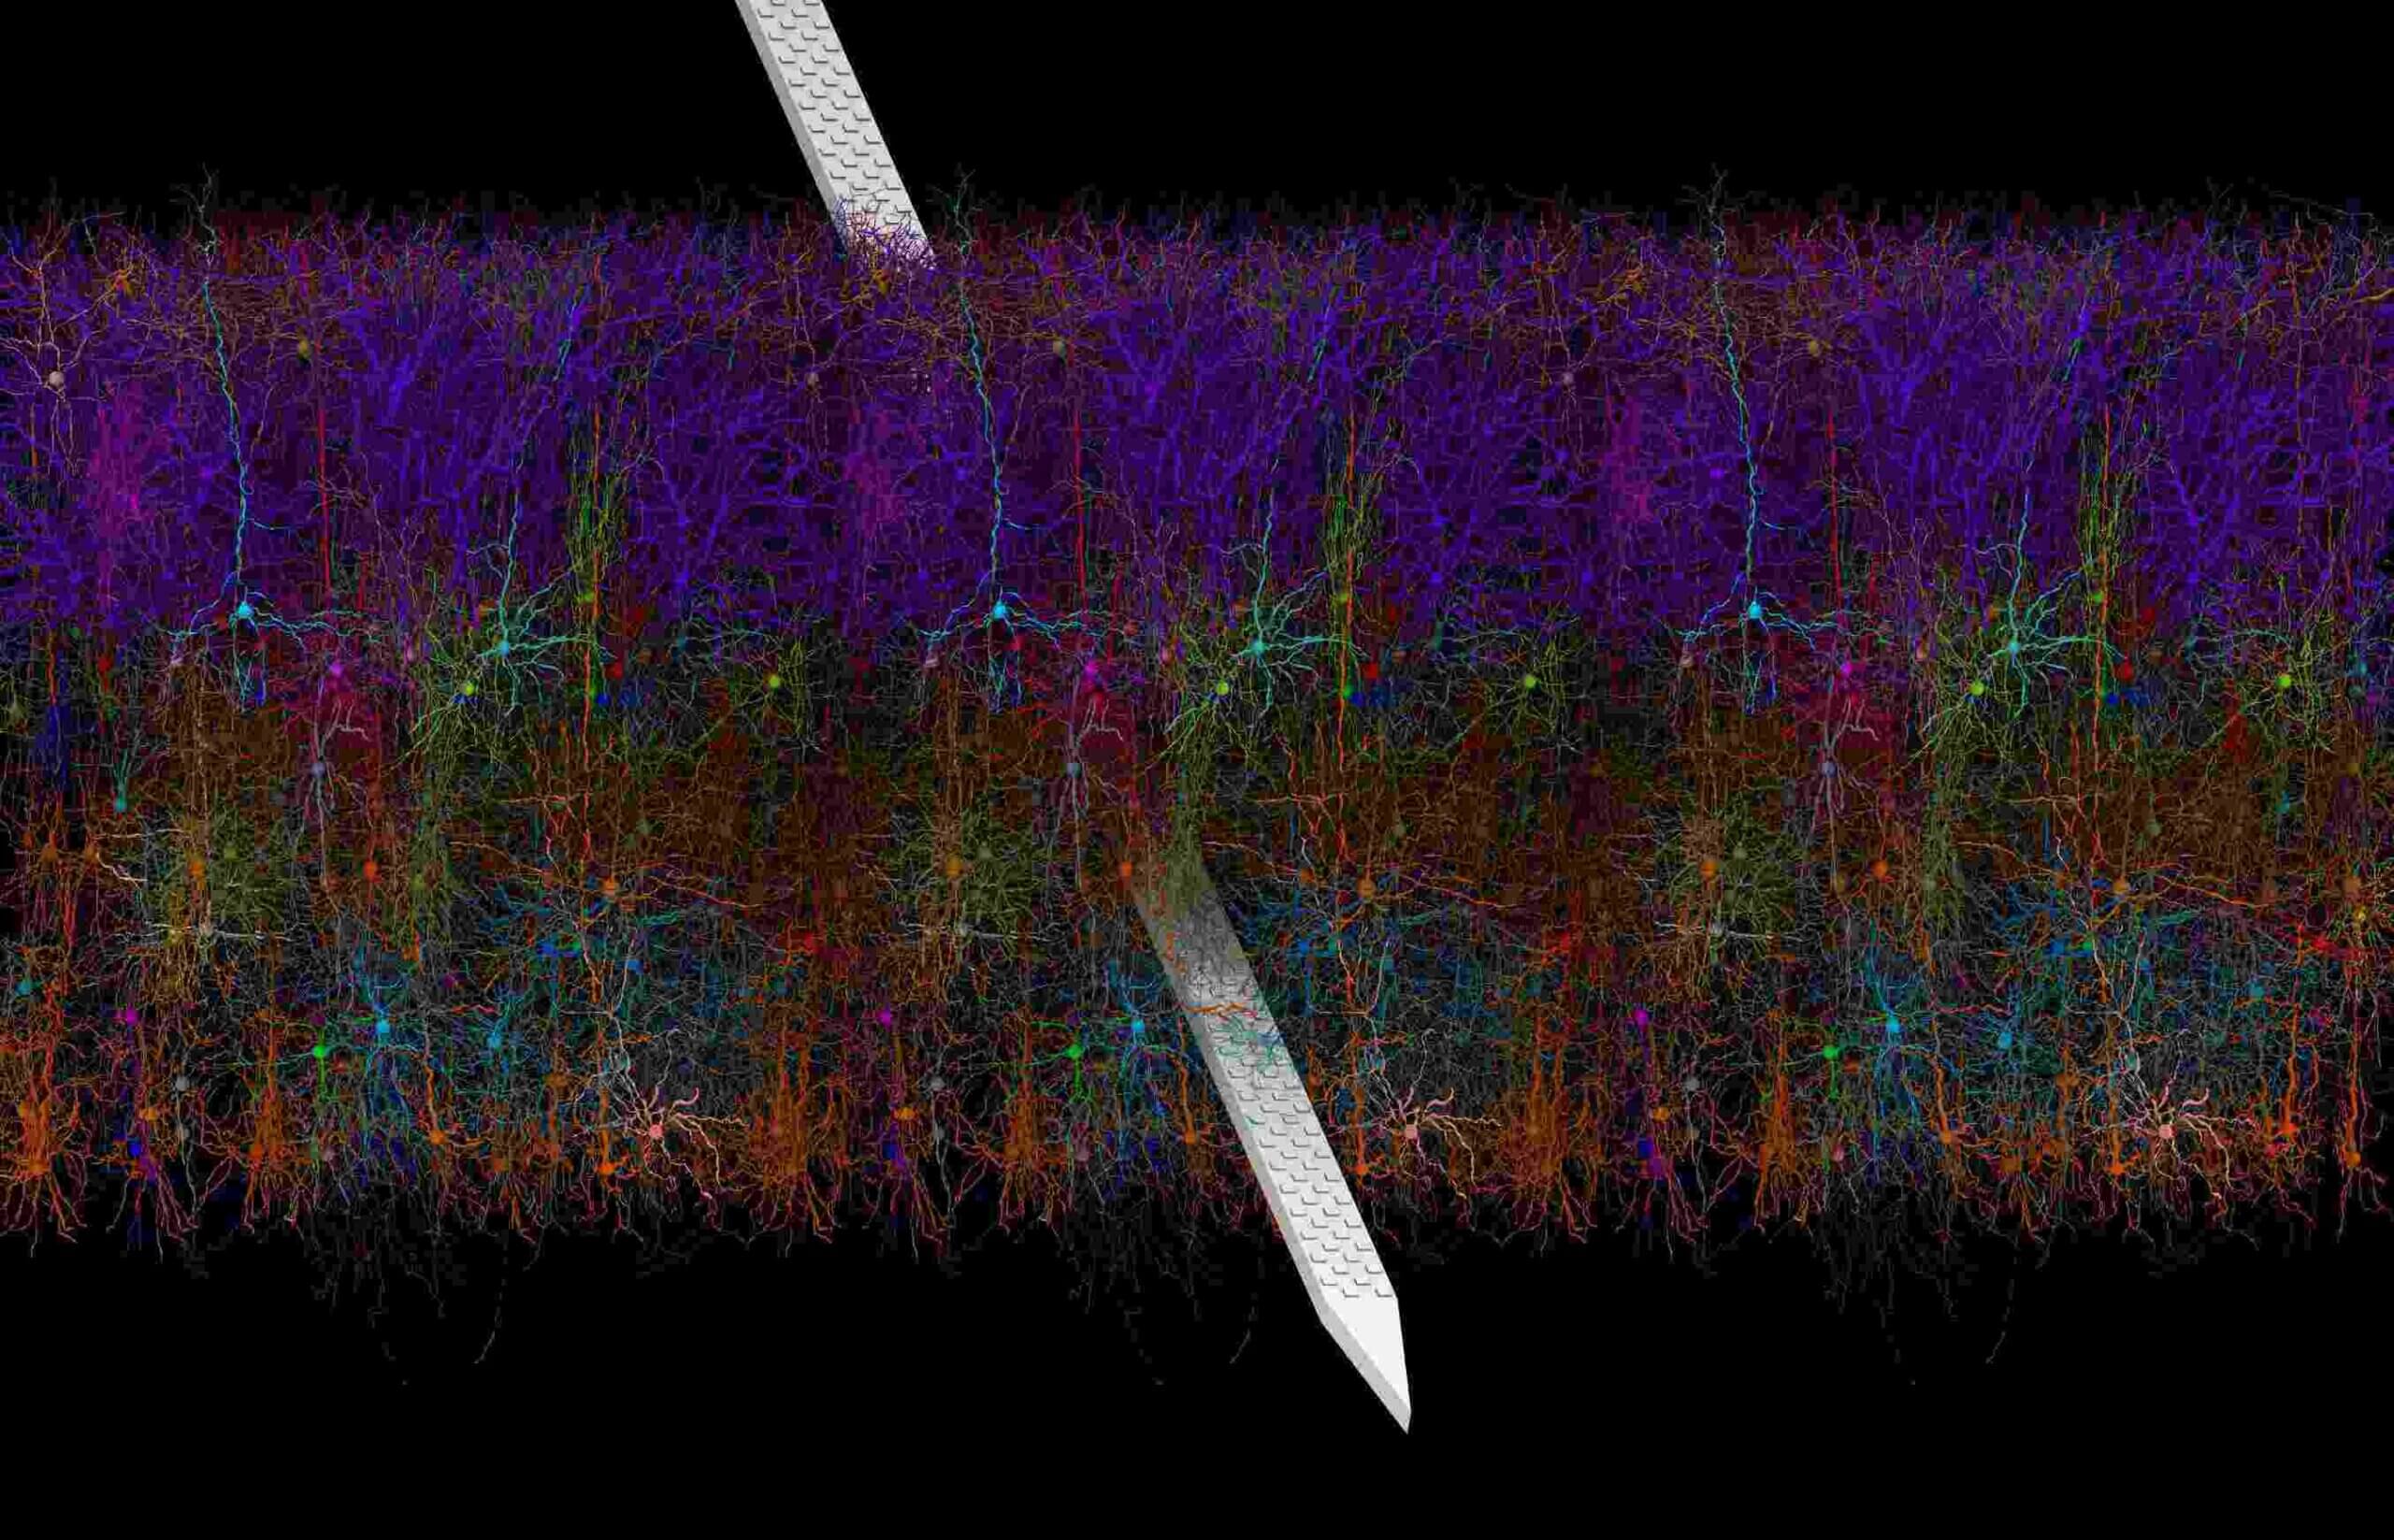 Layers of modeled neurons of different colors with an electrode through the middle of the layers